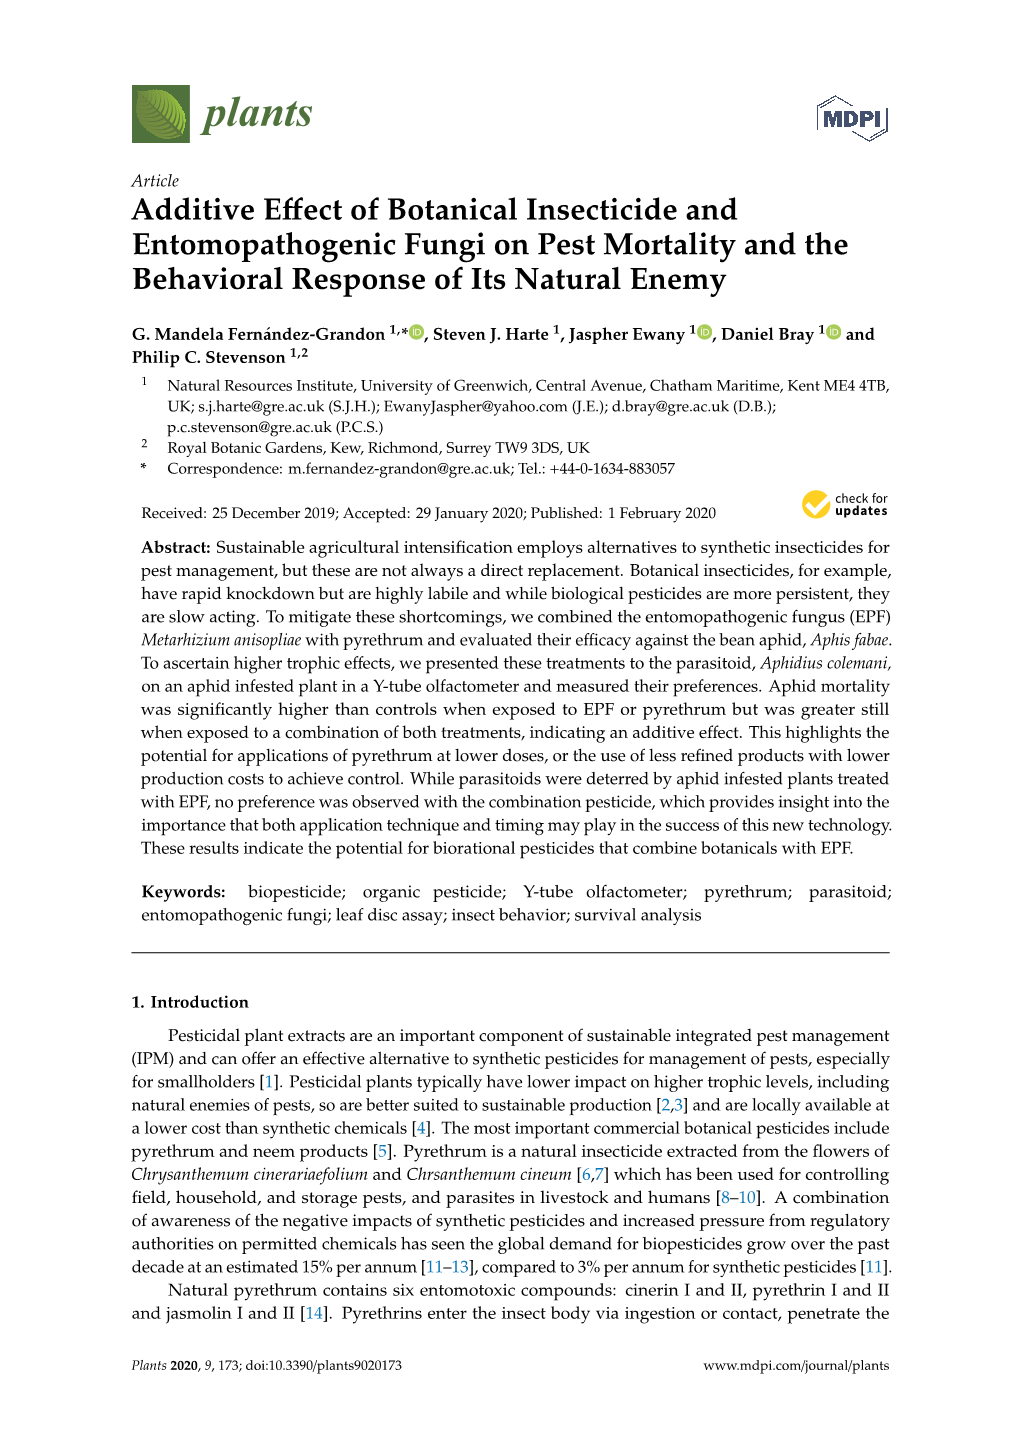 Additive Effect of Botanical Insecticide and Entomopathogenic Fungi on Pest Mortality and the Behavioral Response of Its Natural